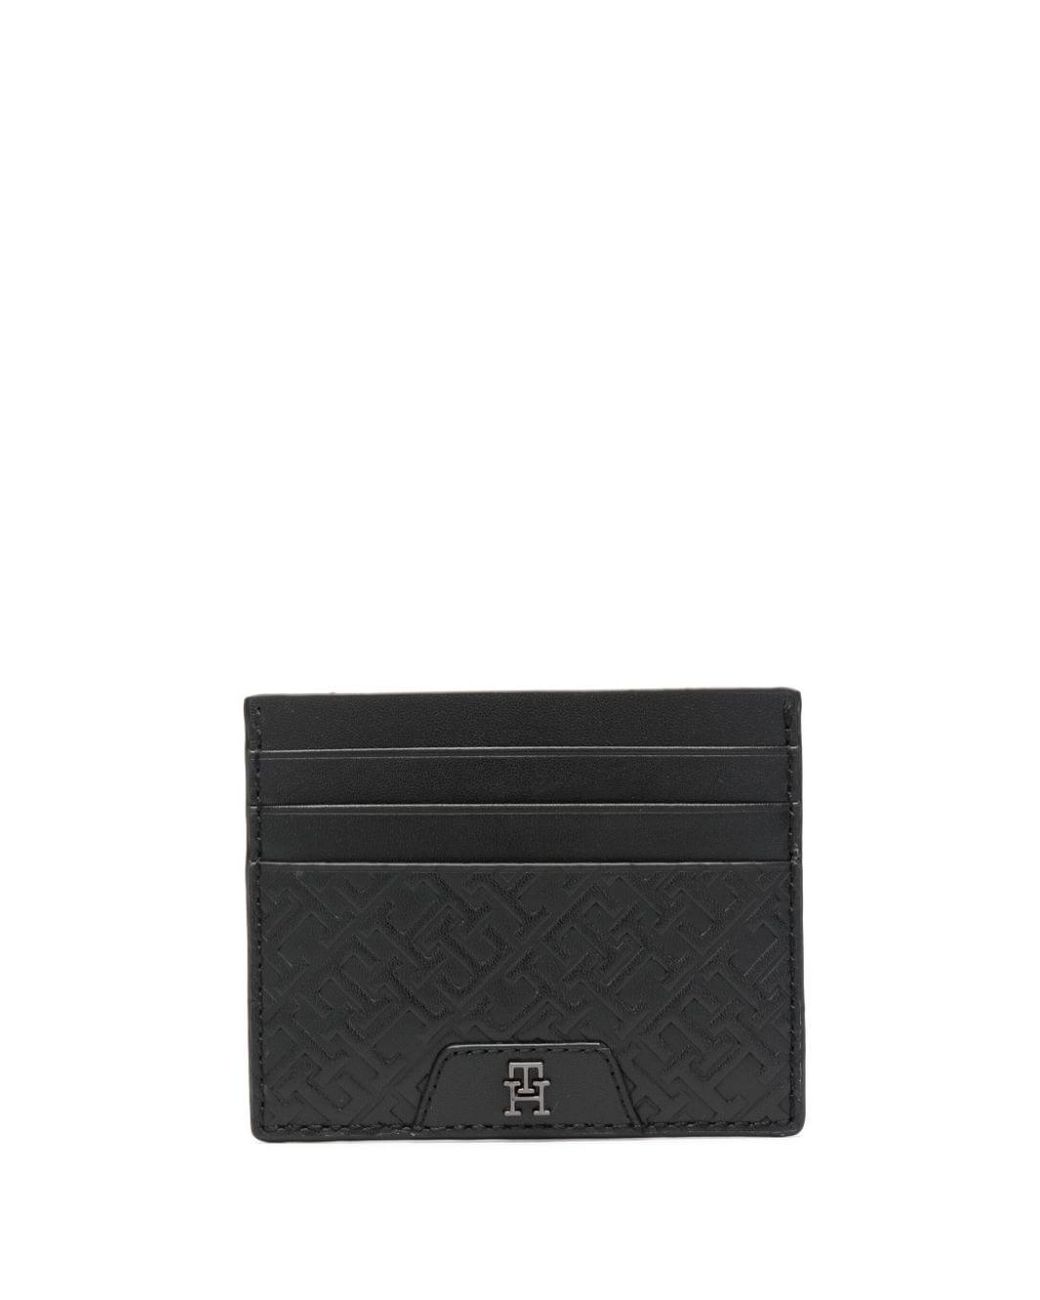 Tommy Hilfiger Leather Embossed Monogram Wallet - Farfetch